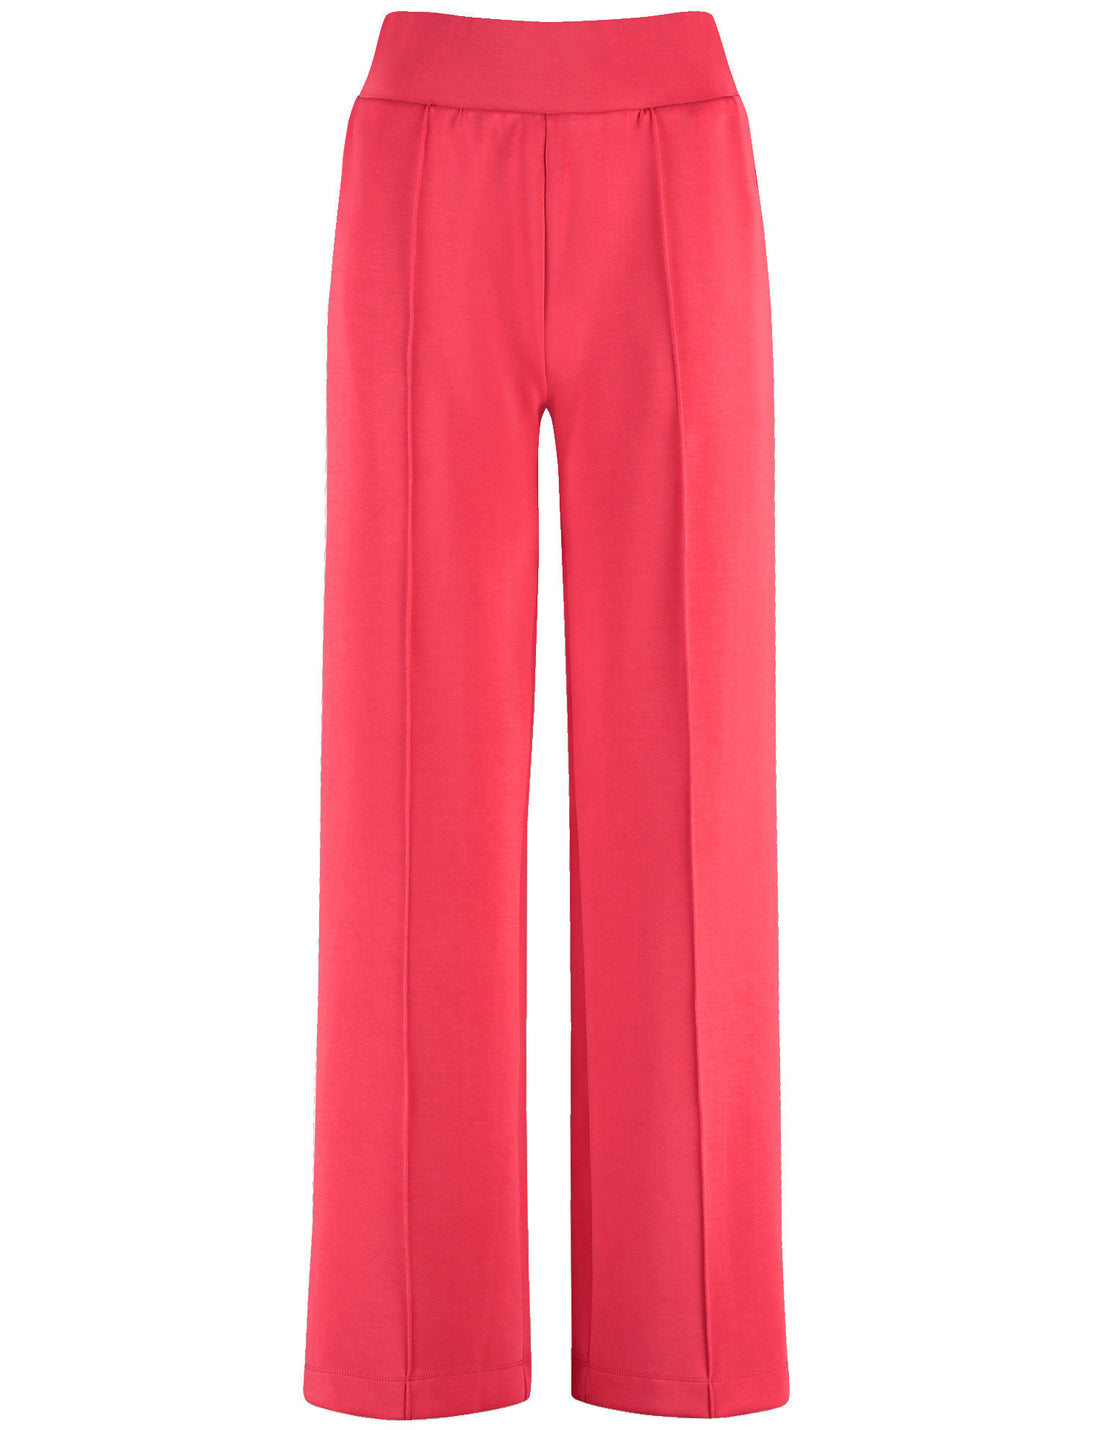 Wide Cloth Trousers With Vertical Pintucks_222188-44020_60140_02